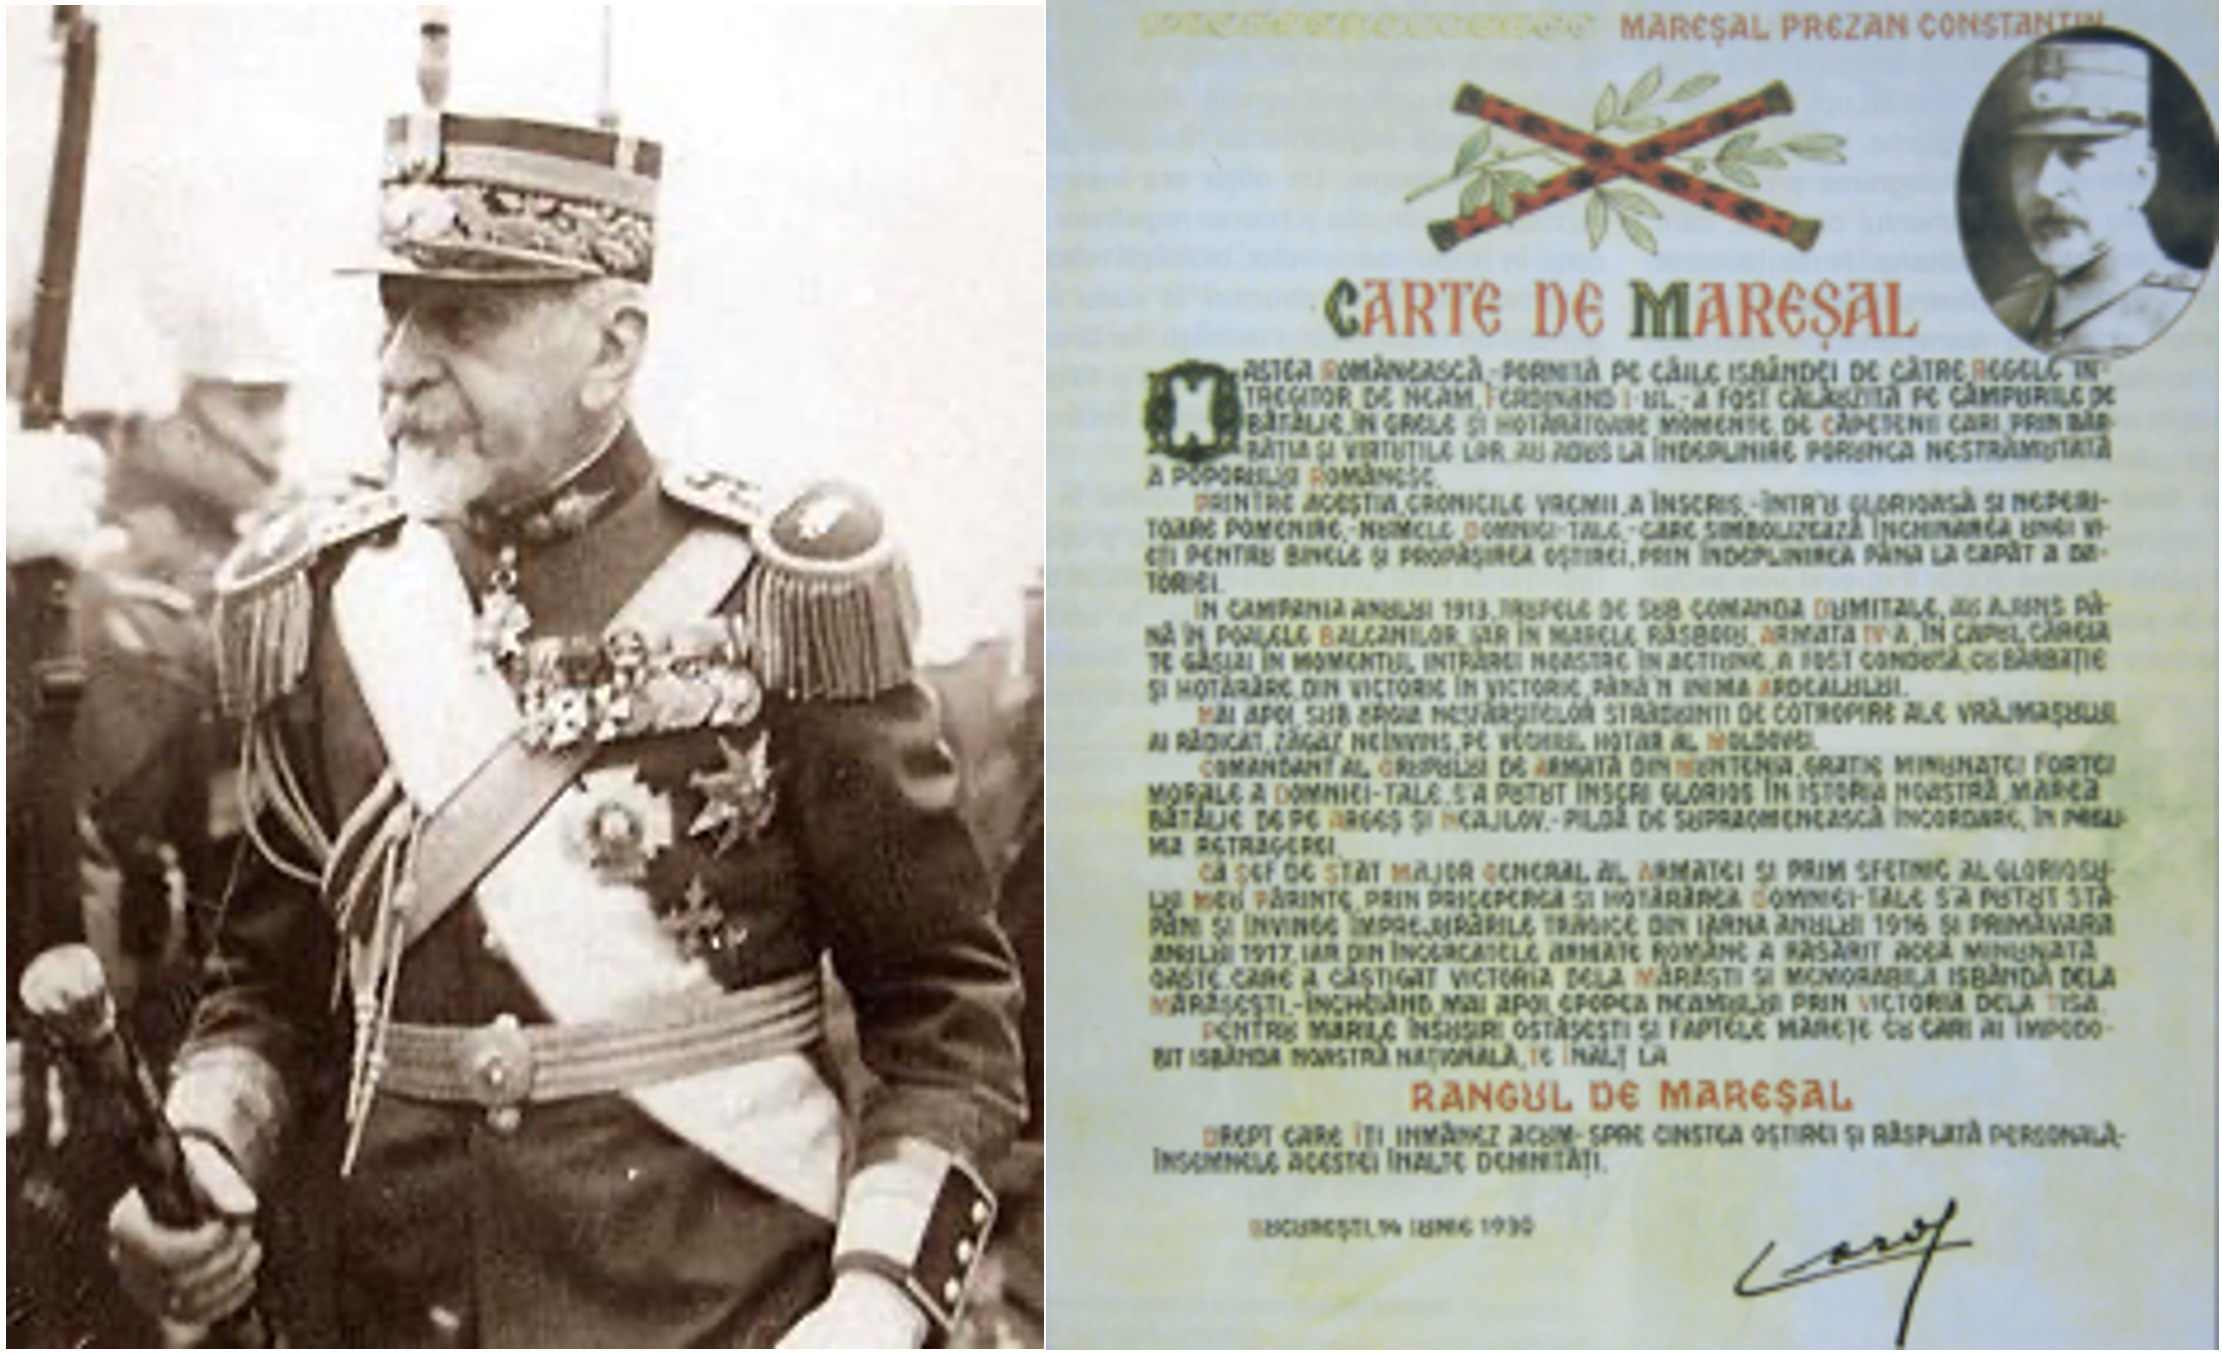 The most important military leader from the First World War - Marshal Constantin Prezan